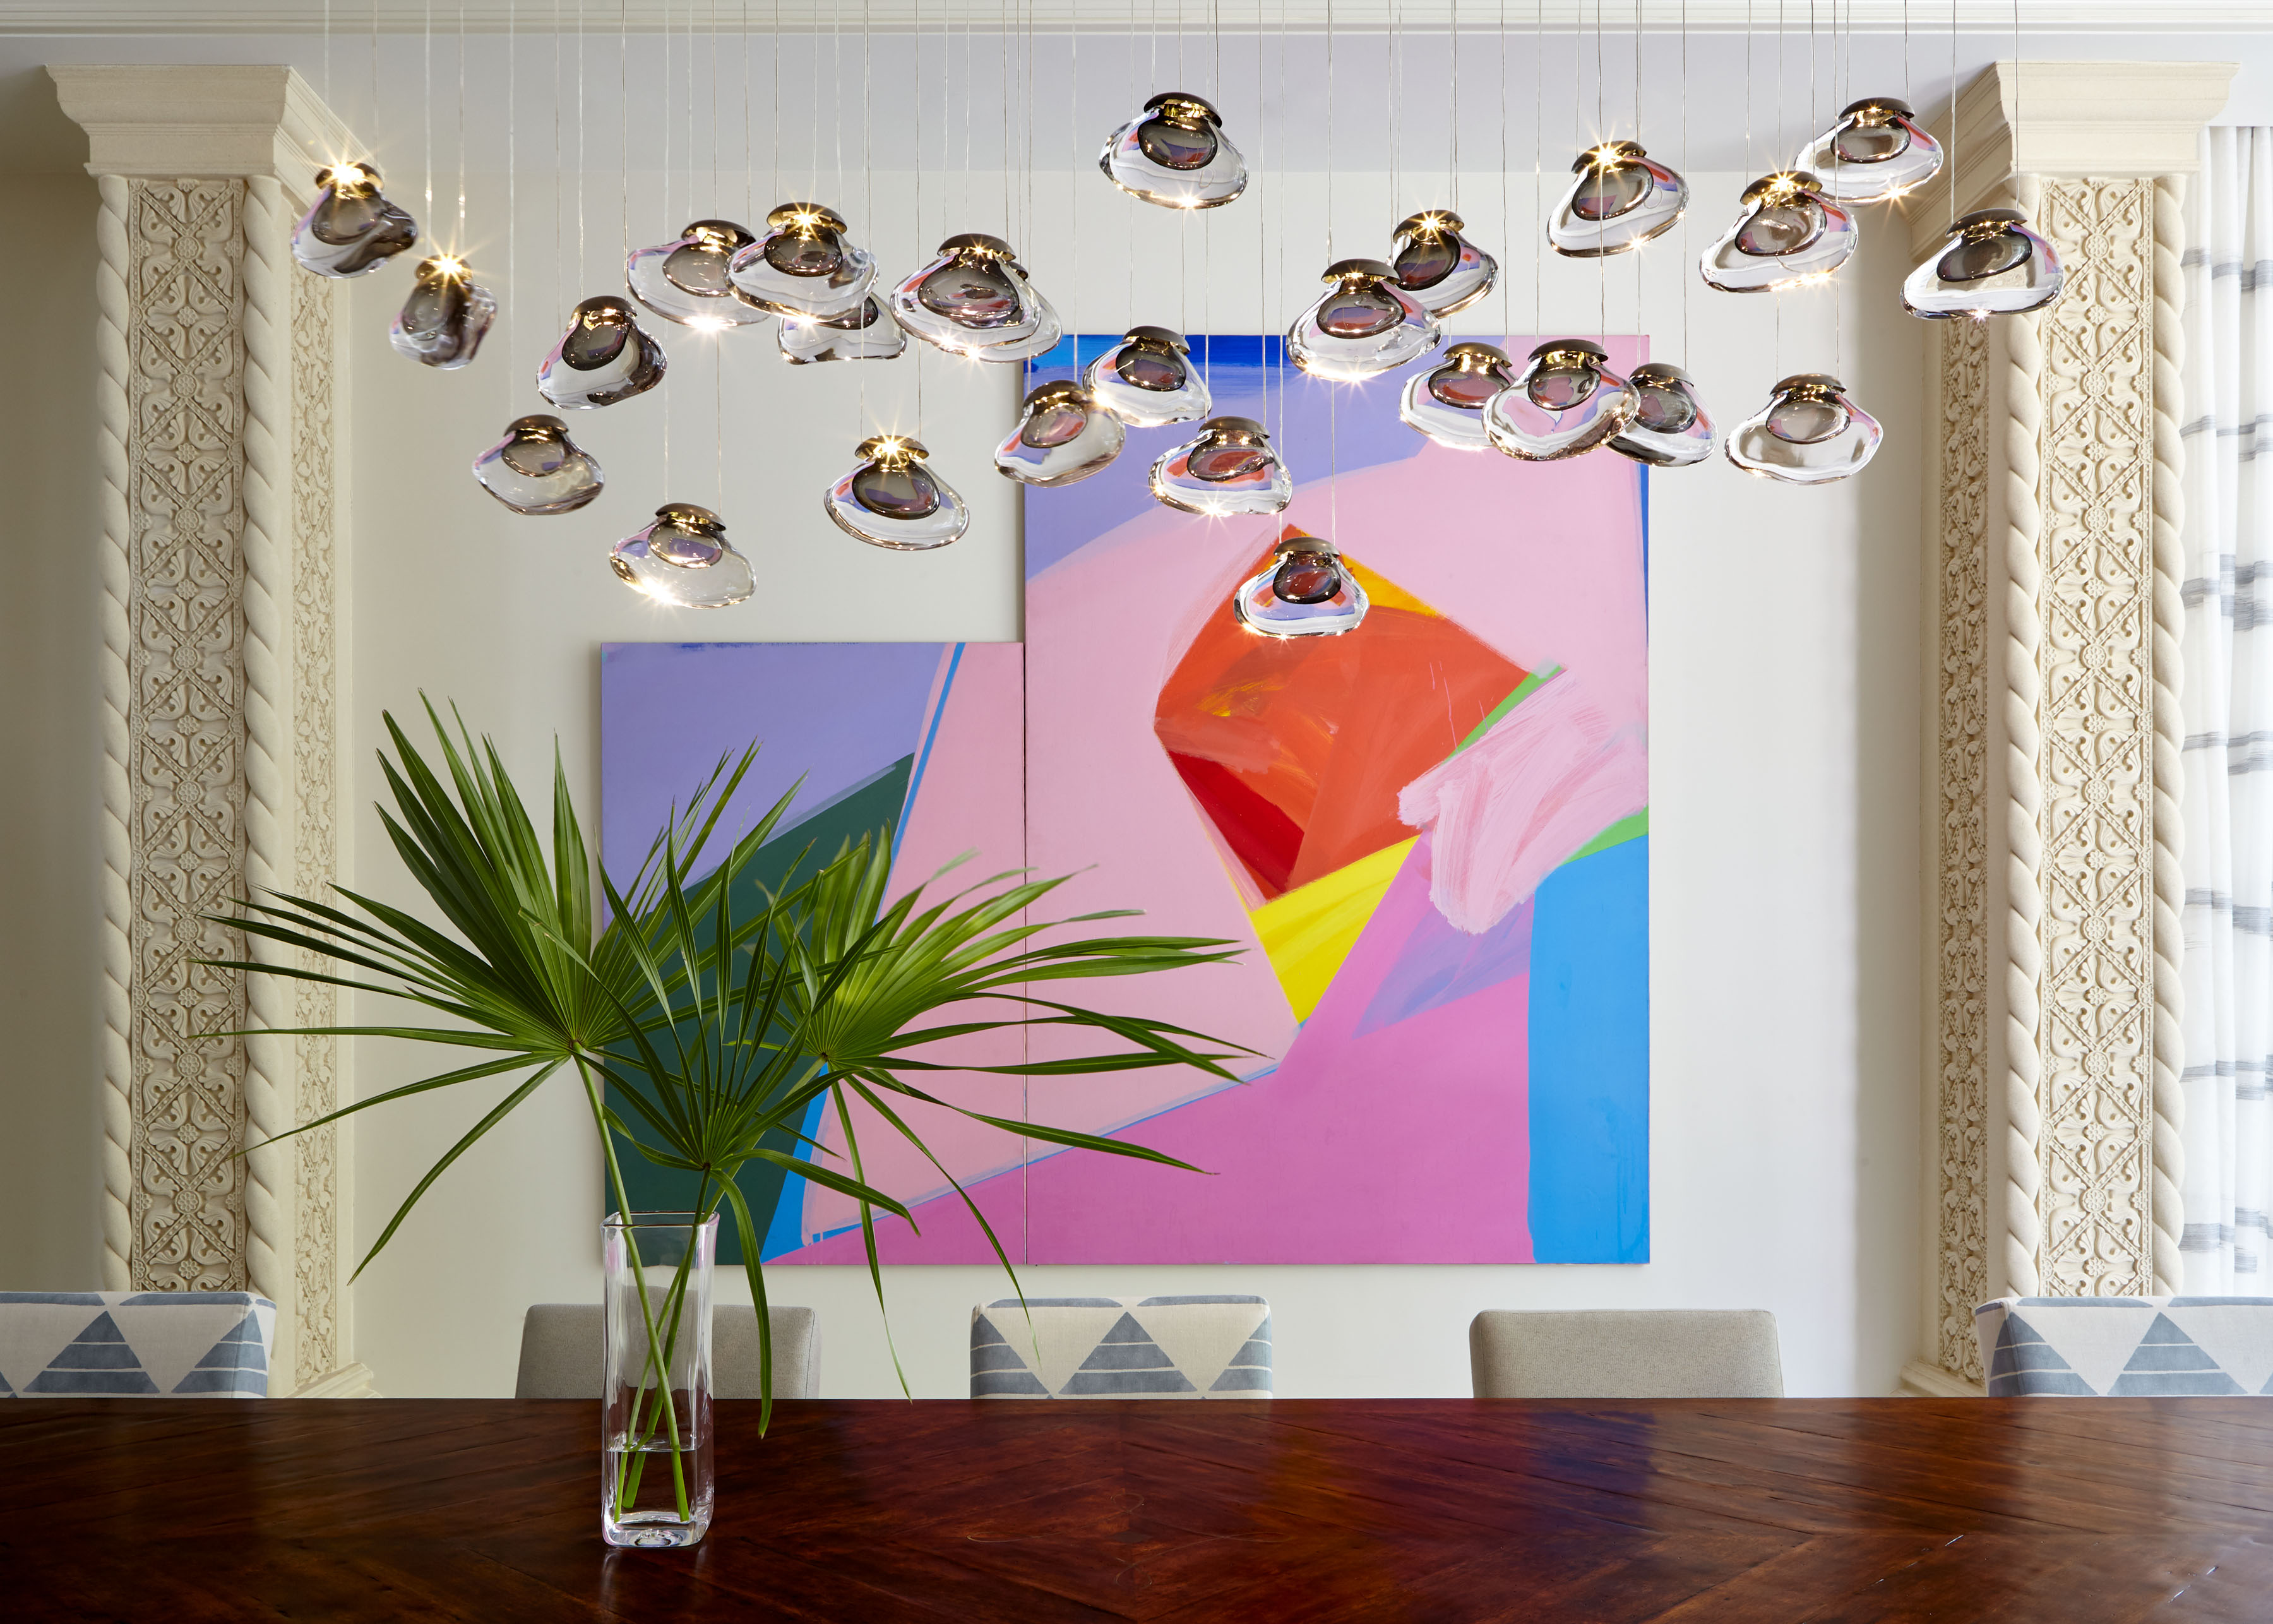 Hanging Crystal Lampshades, A Tropical Plant and Painting in Predominantly Cool Colors